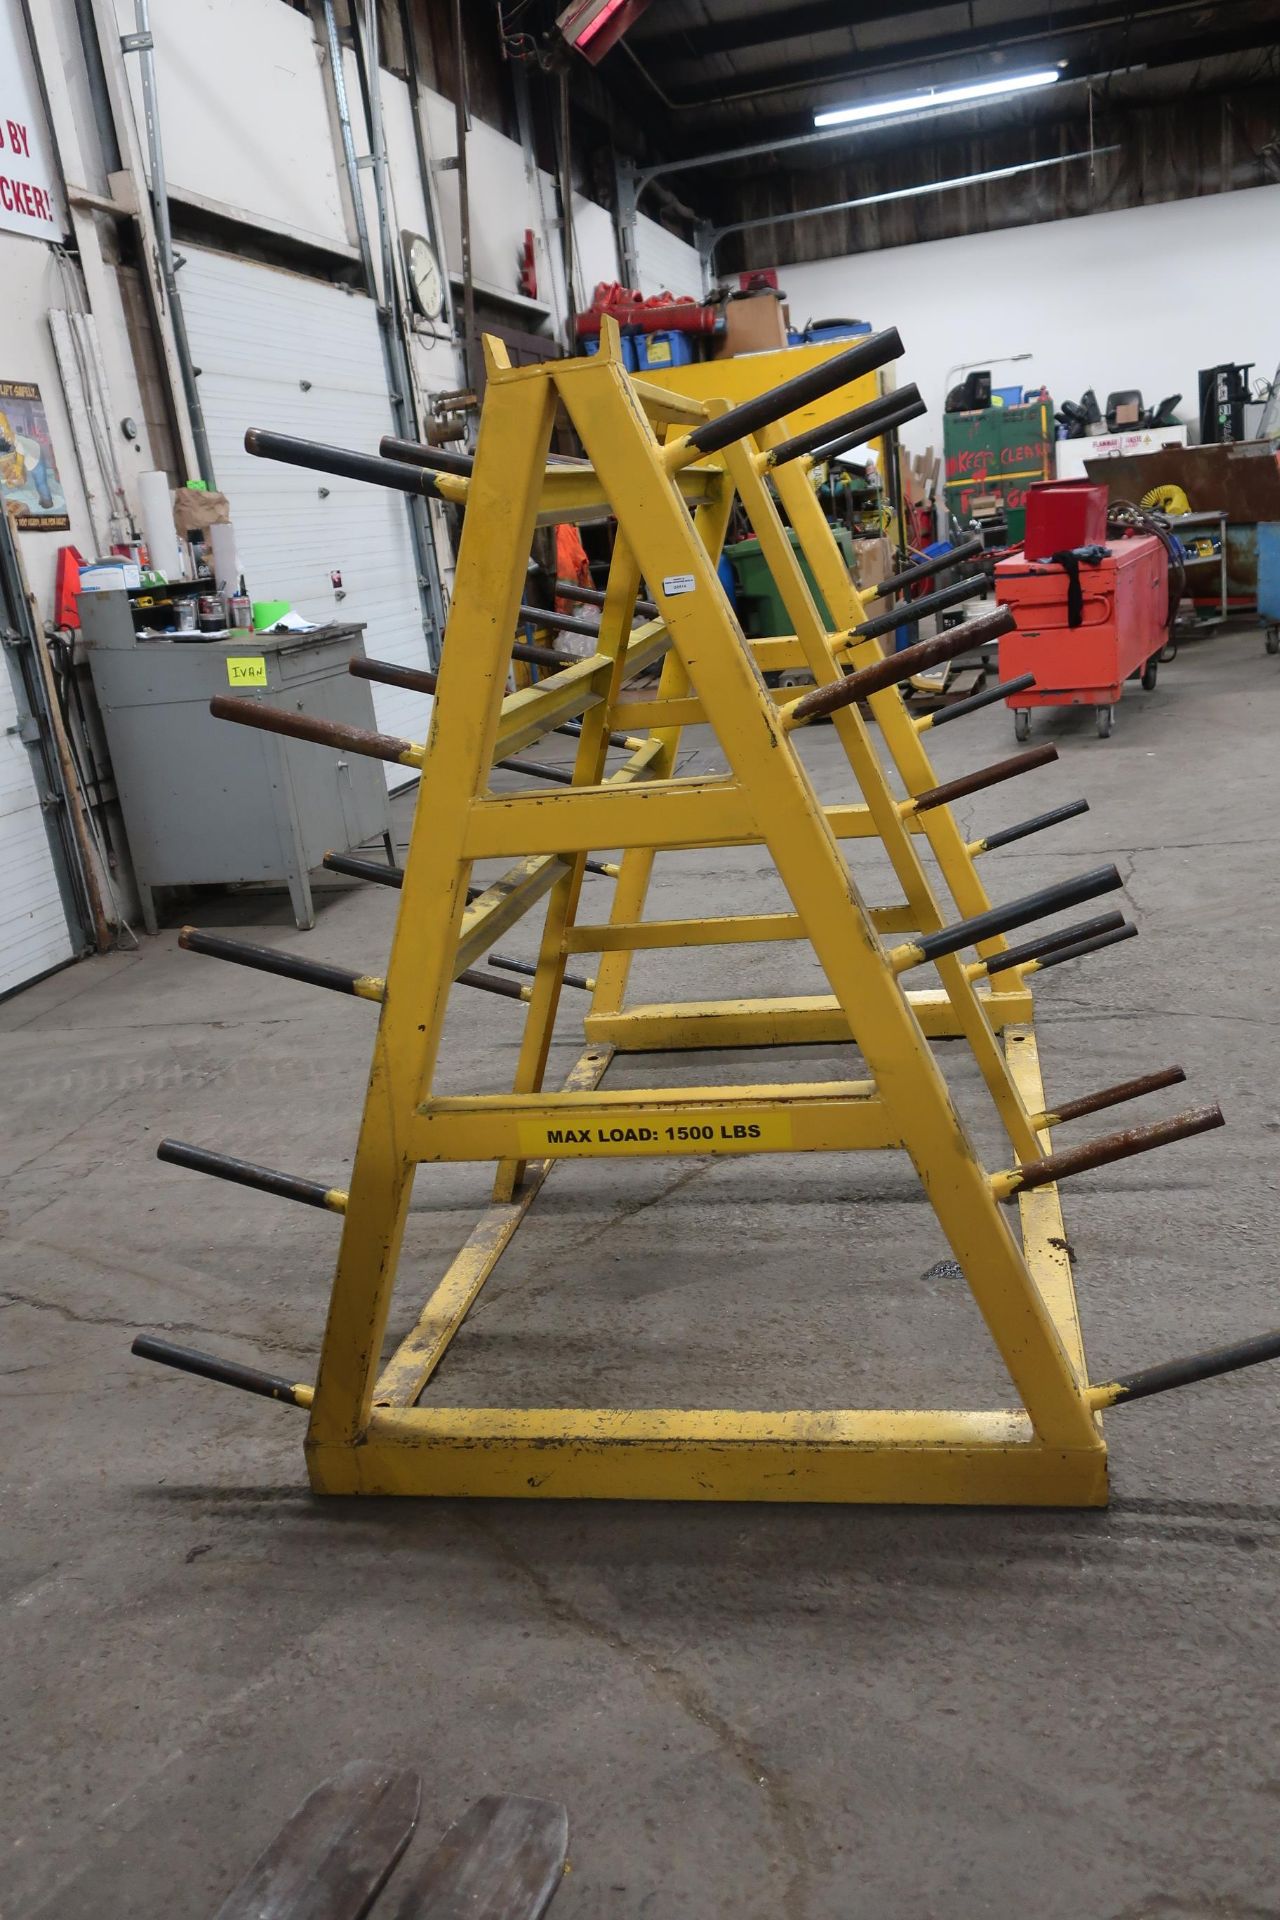 Heavy Duty Shop Rack for Dies and more up to 1500lbs capacity - Image 2 of 4